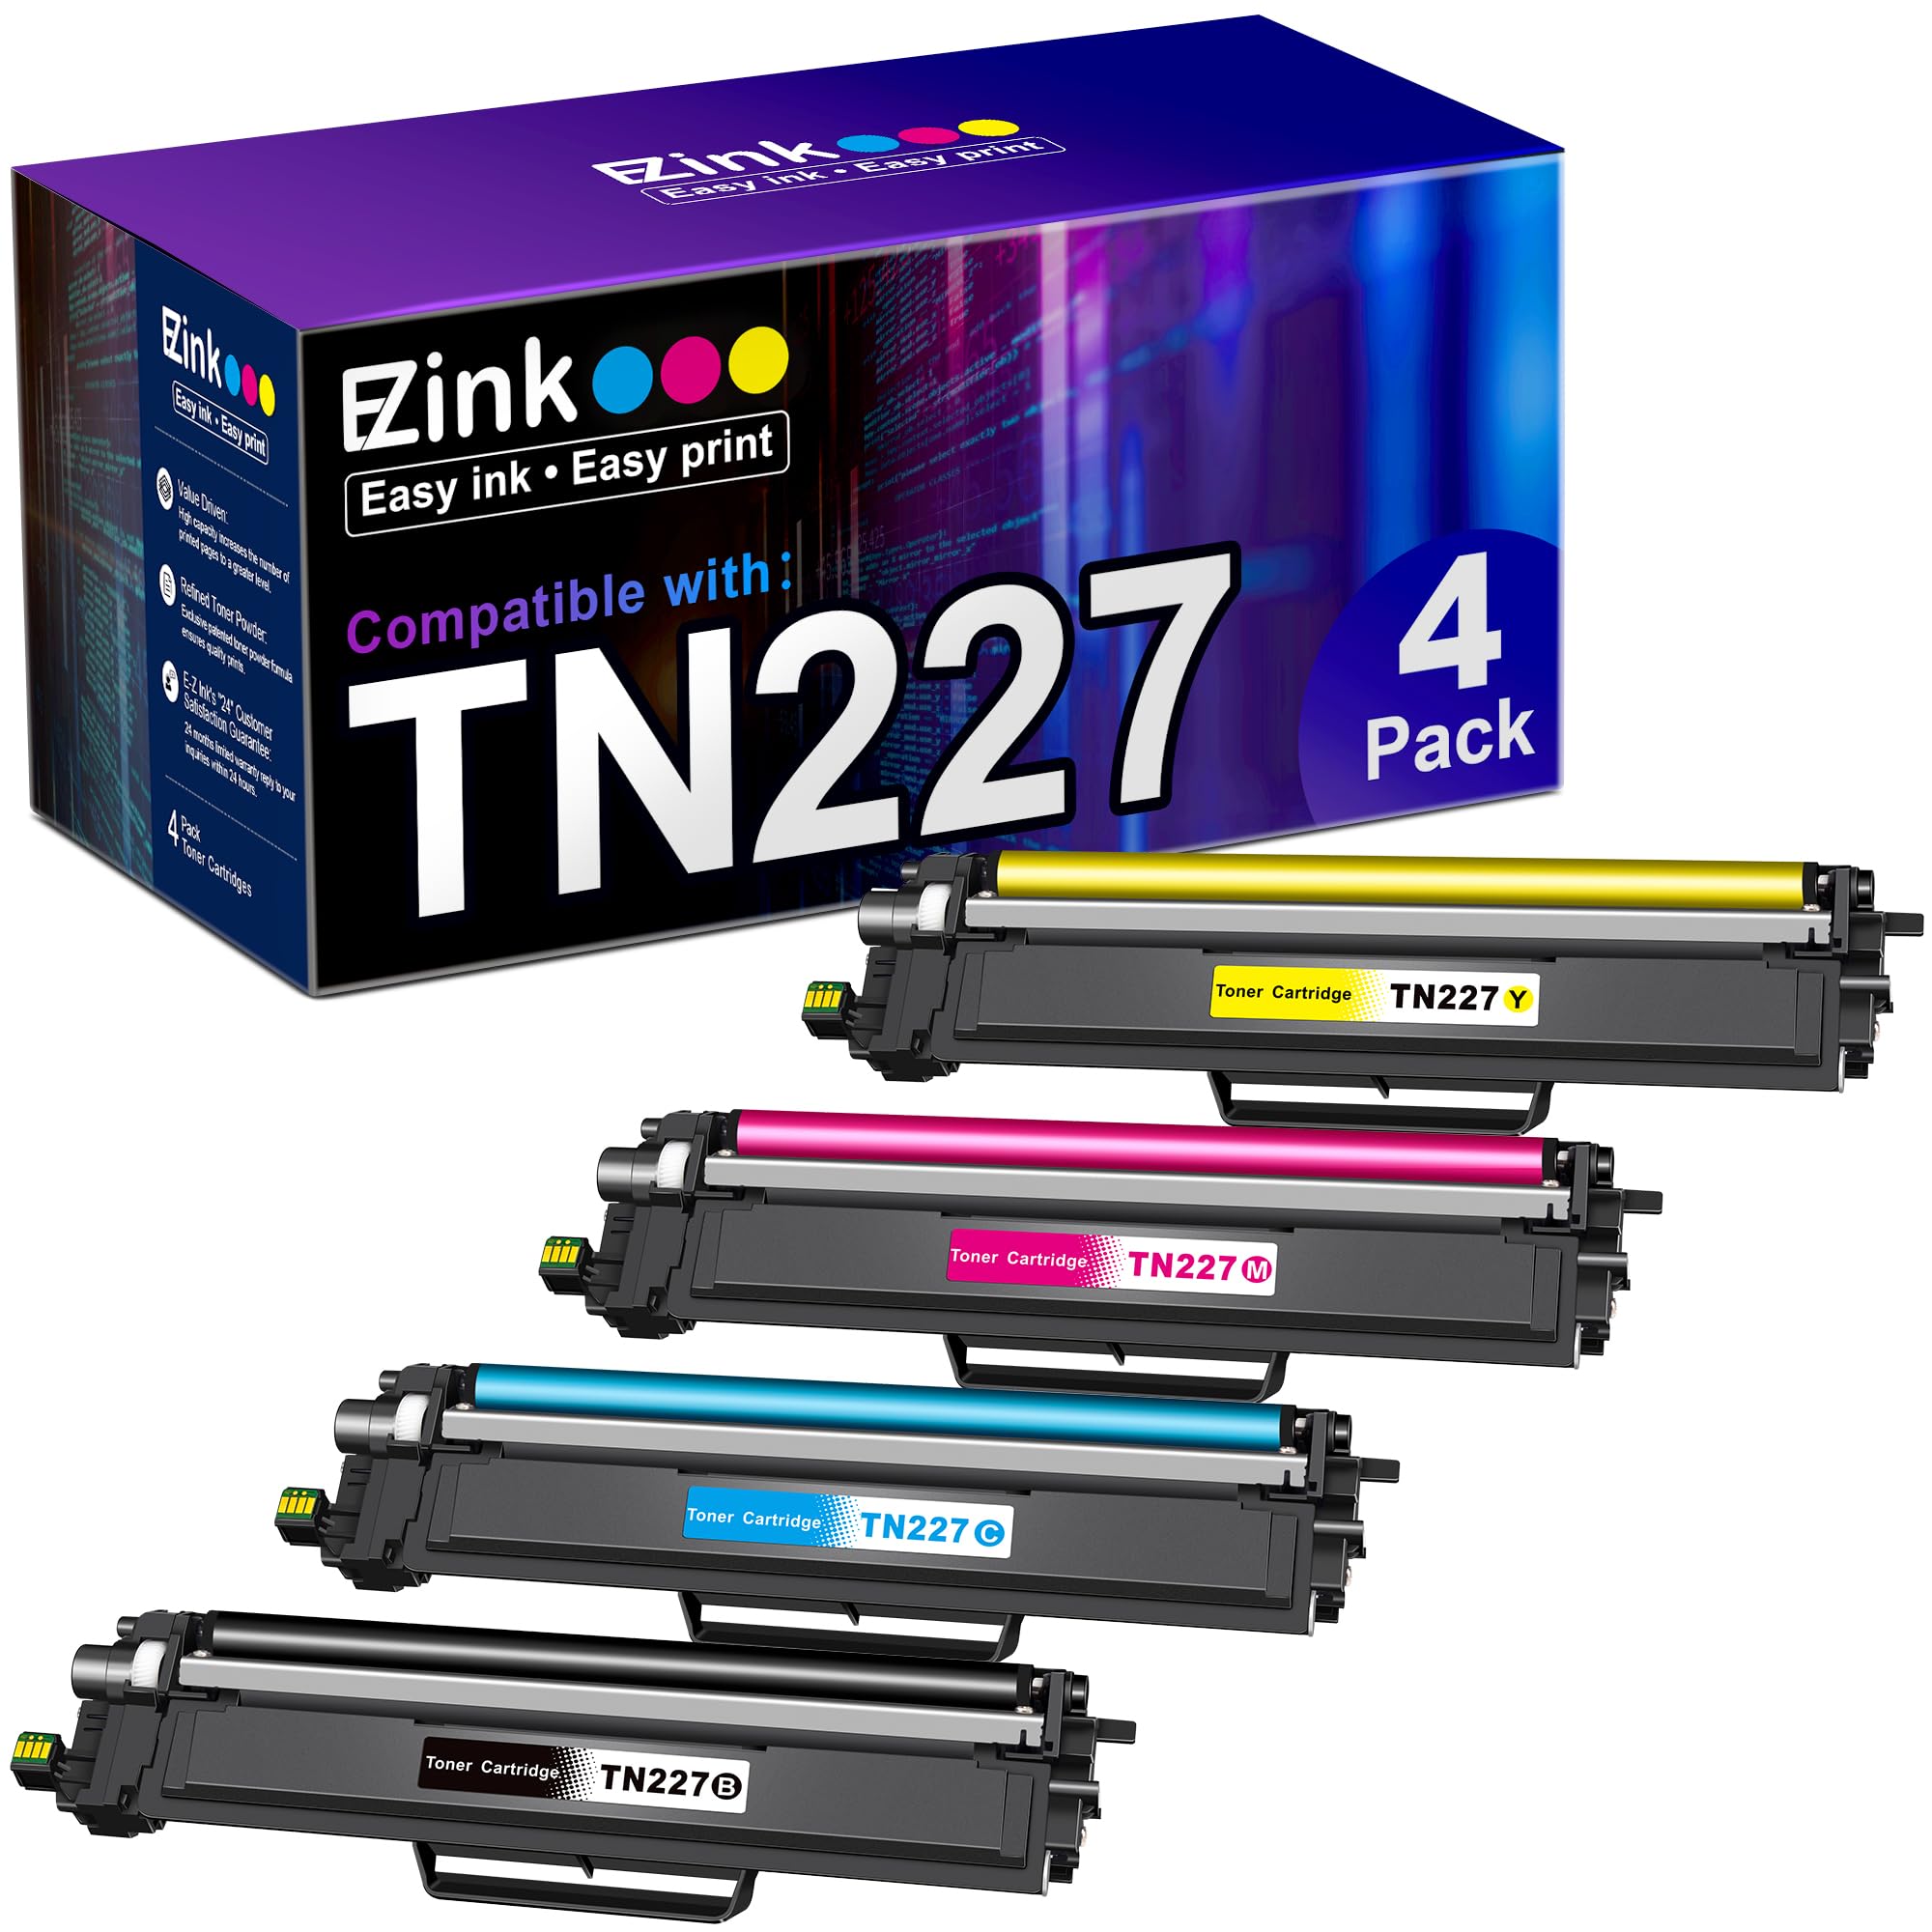 E-Z Ink (TM) TN227 Compatible Toner Cartridge Replacement for Brother TN227 TN227BK TN223 TN-227BK/C/M/Y High Yield to use with HL-L3270CDW HL-L3230CDW HL-L3210CW HL-L3290CDW MFC-L3710CDW (4 Pack)